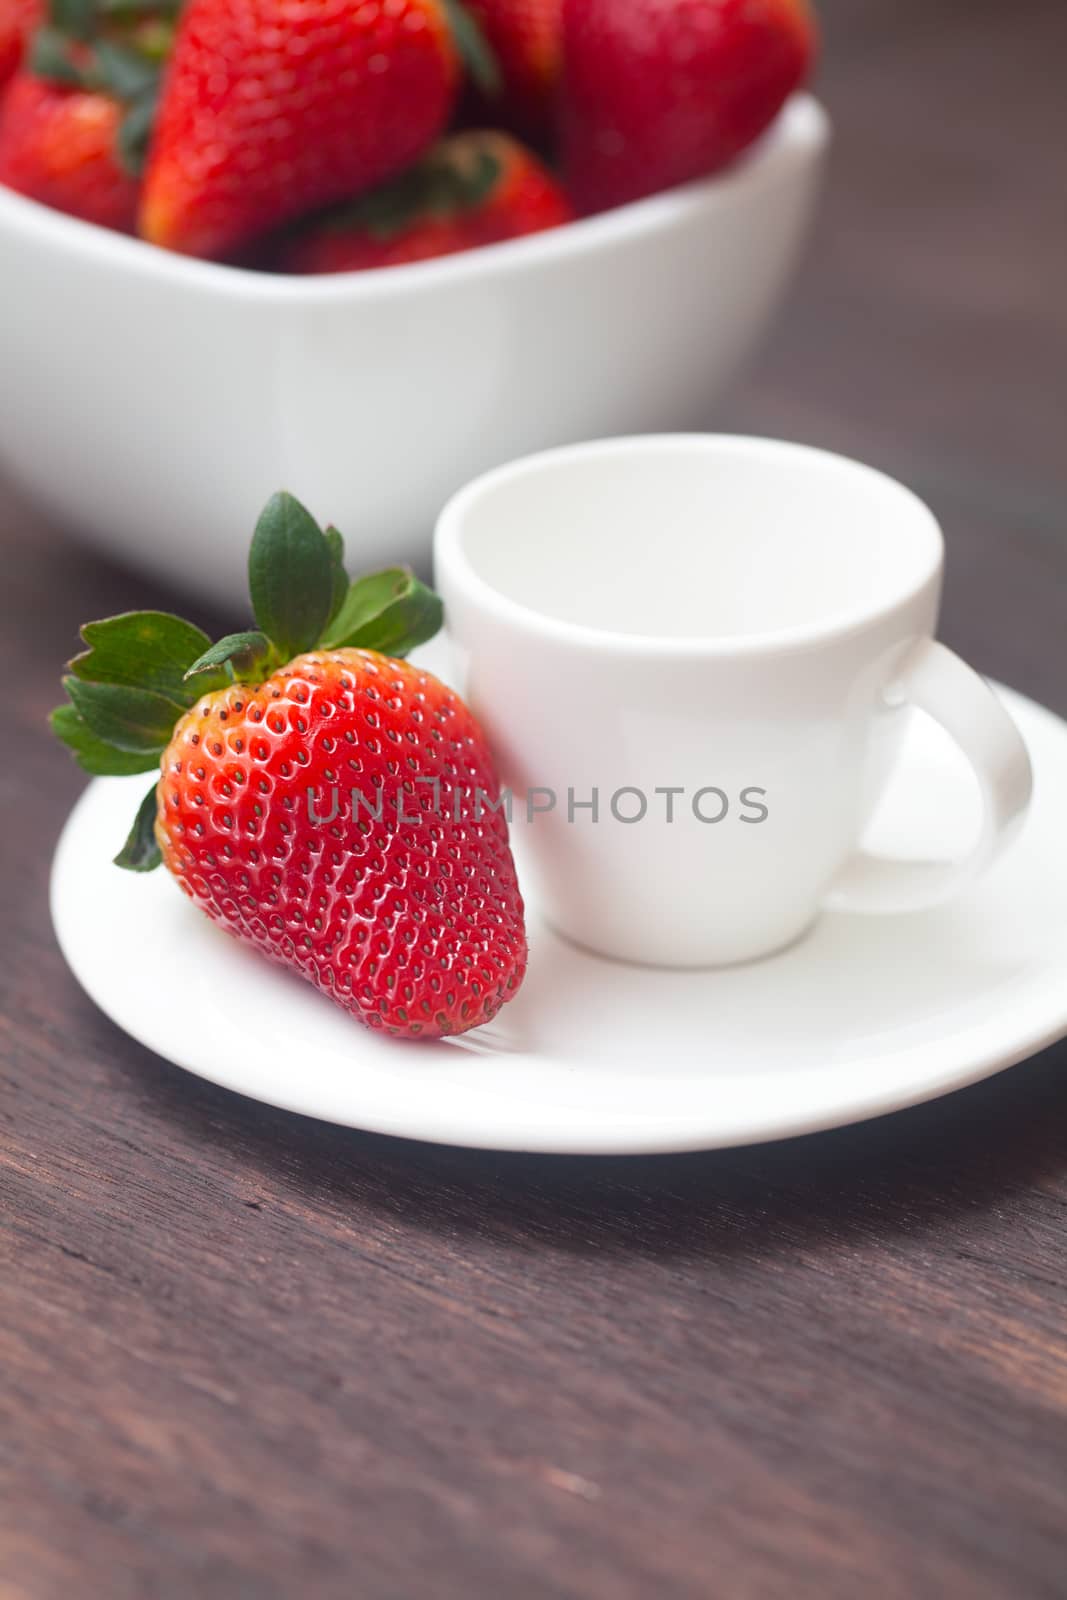 red juicy strawberry in a bowl and cup on a wooden surface